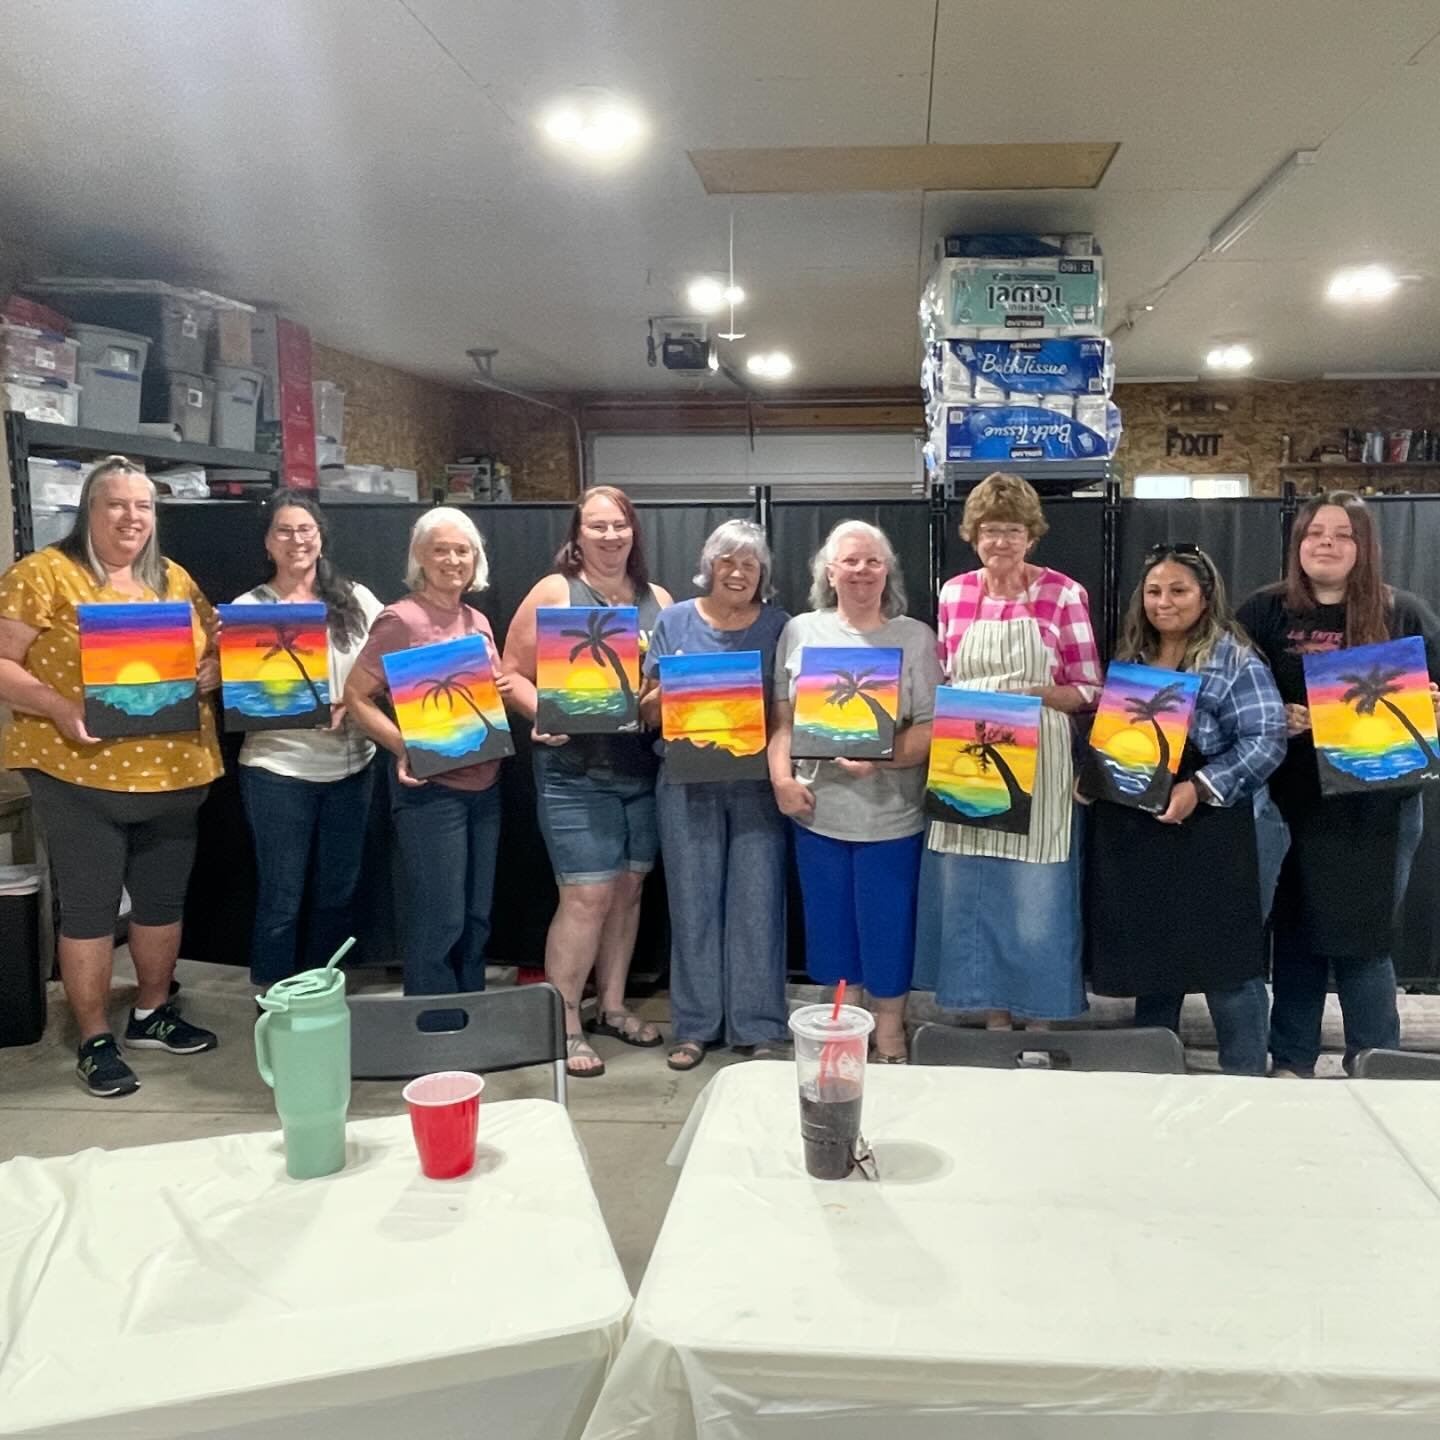 It was a great paint night with these fun ladies! Thank you @kdflygirl66 for choosing me for your party! 
#paintnight #artyparty #paintingwithfriends